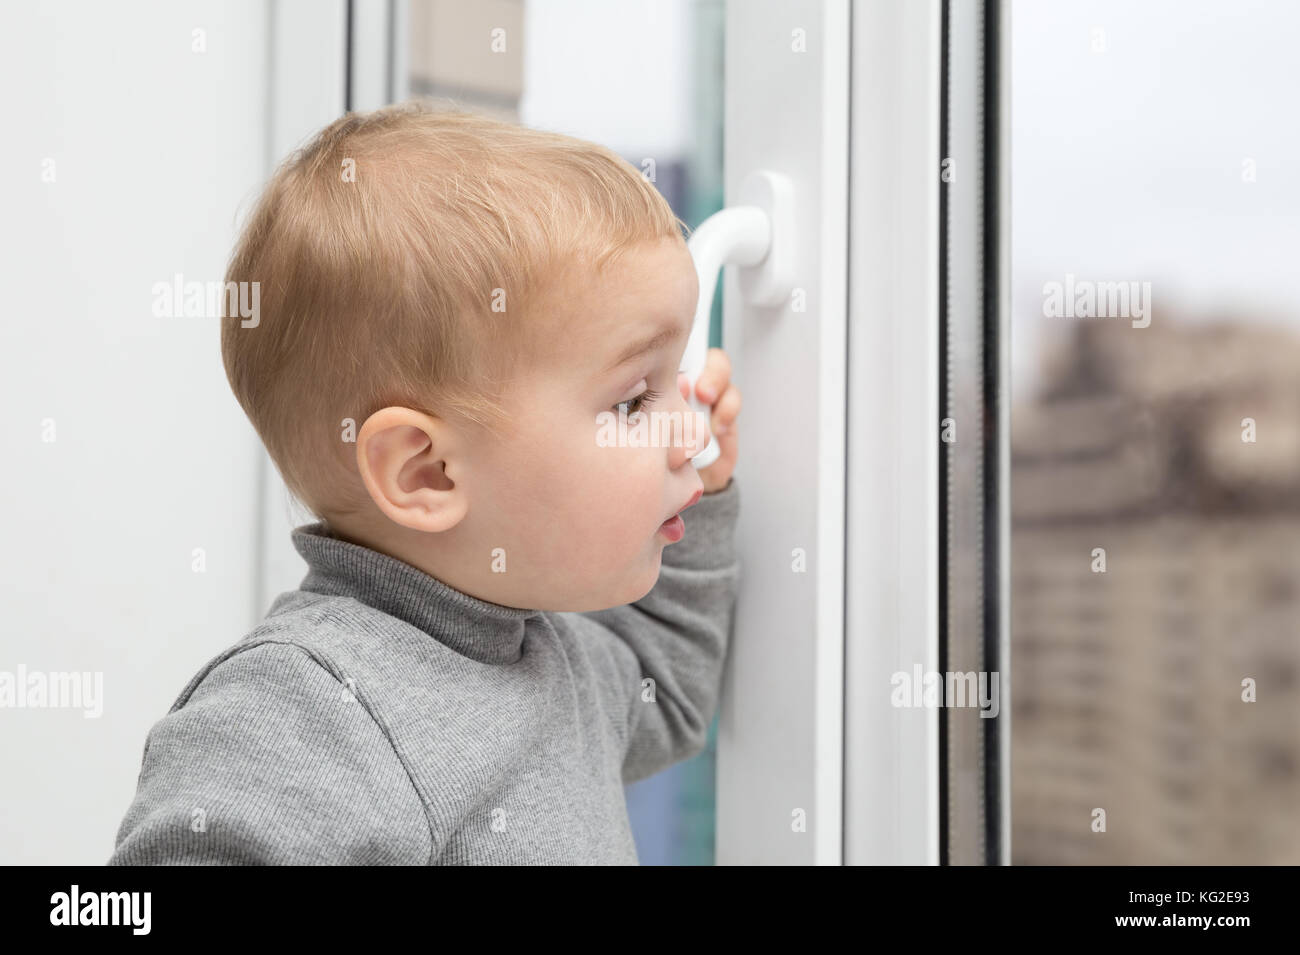 Little baby kid looking out the window Stock Photo